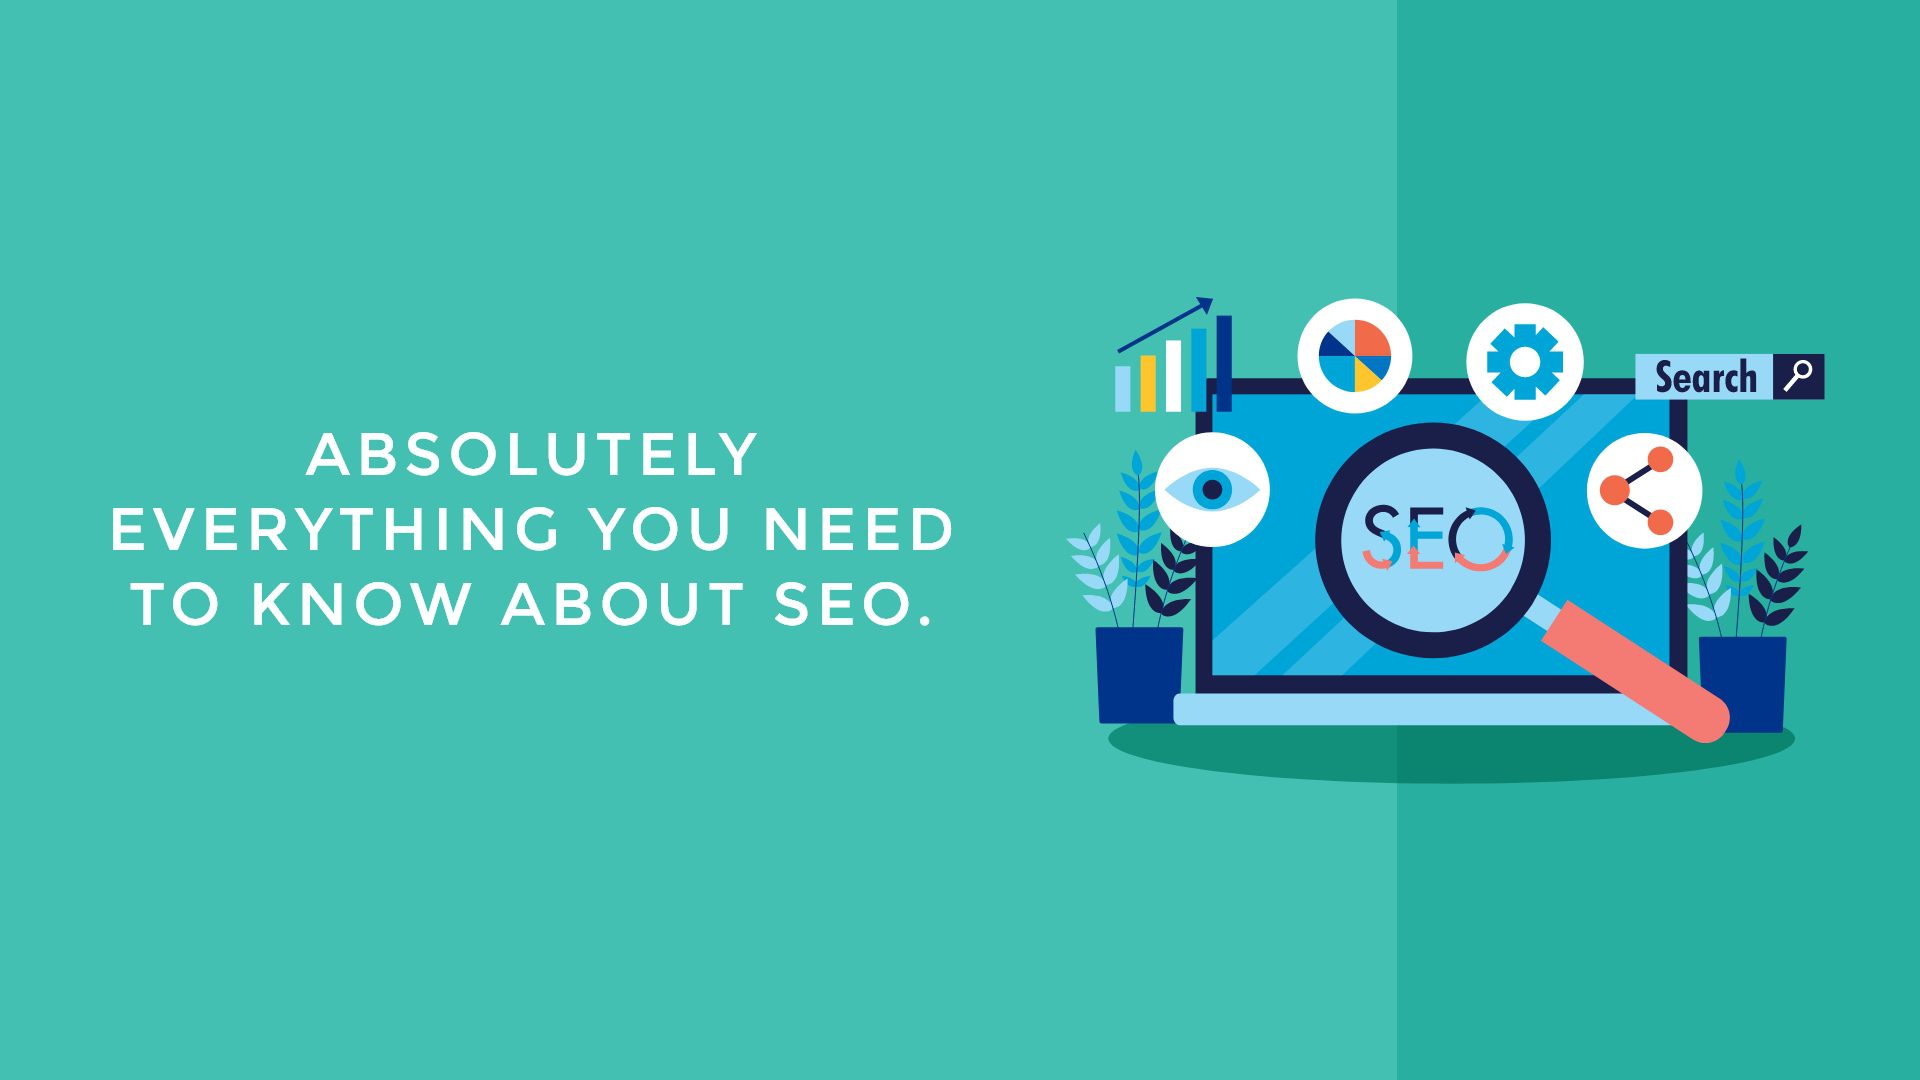 Absolutely Everything You Need to Know About SEO